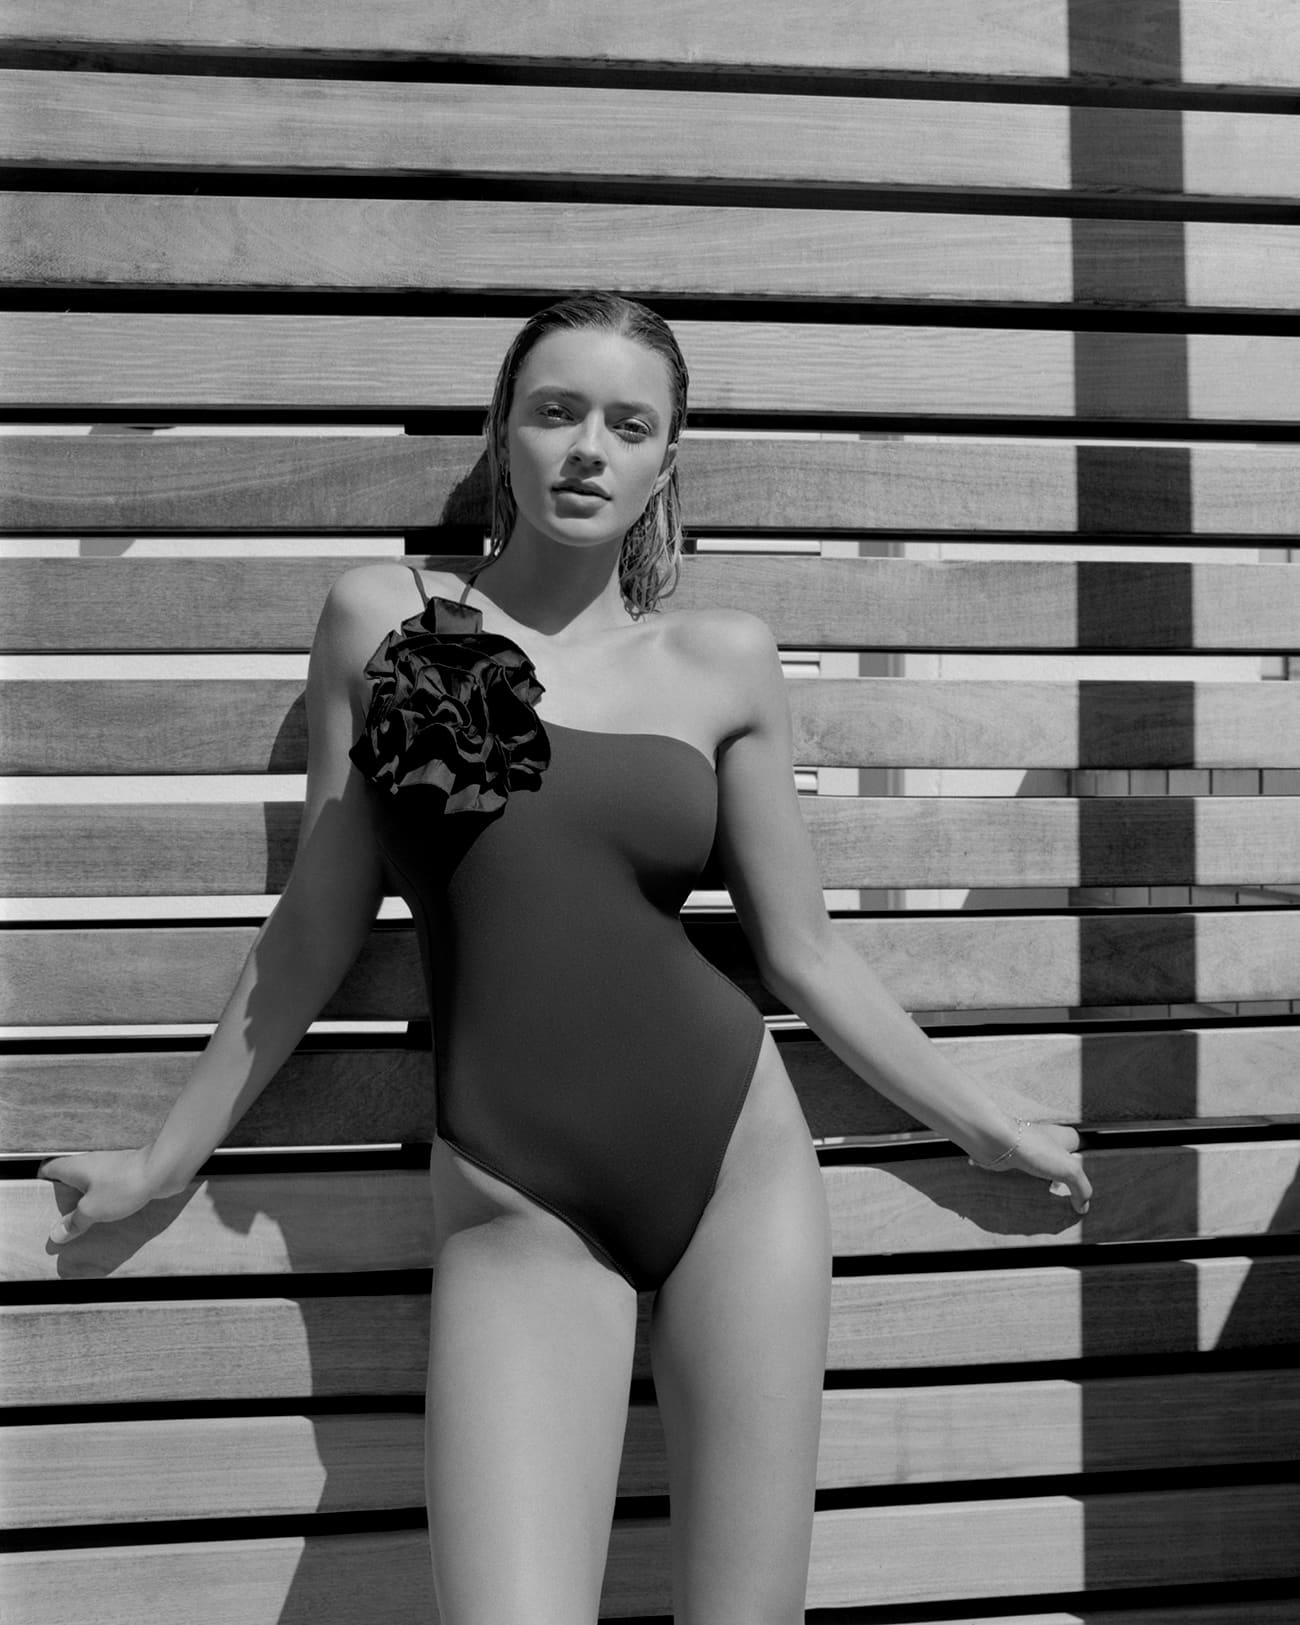 Female APM model Samantha Romberger is wearing a Zara bathing suit with a flower, her hair is wet and combed back. She is standing against a wooden fence. Photographed by New York photographer Maria Bruun. Photographed using a Mamiya RZ67 camera and Ilford black and white film. Editorial for Solstice Magazine.